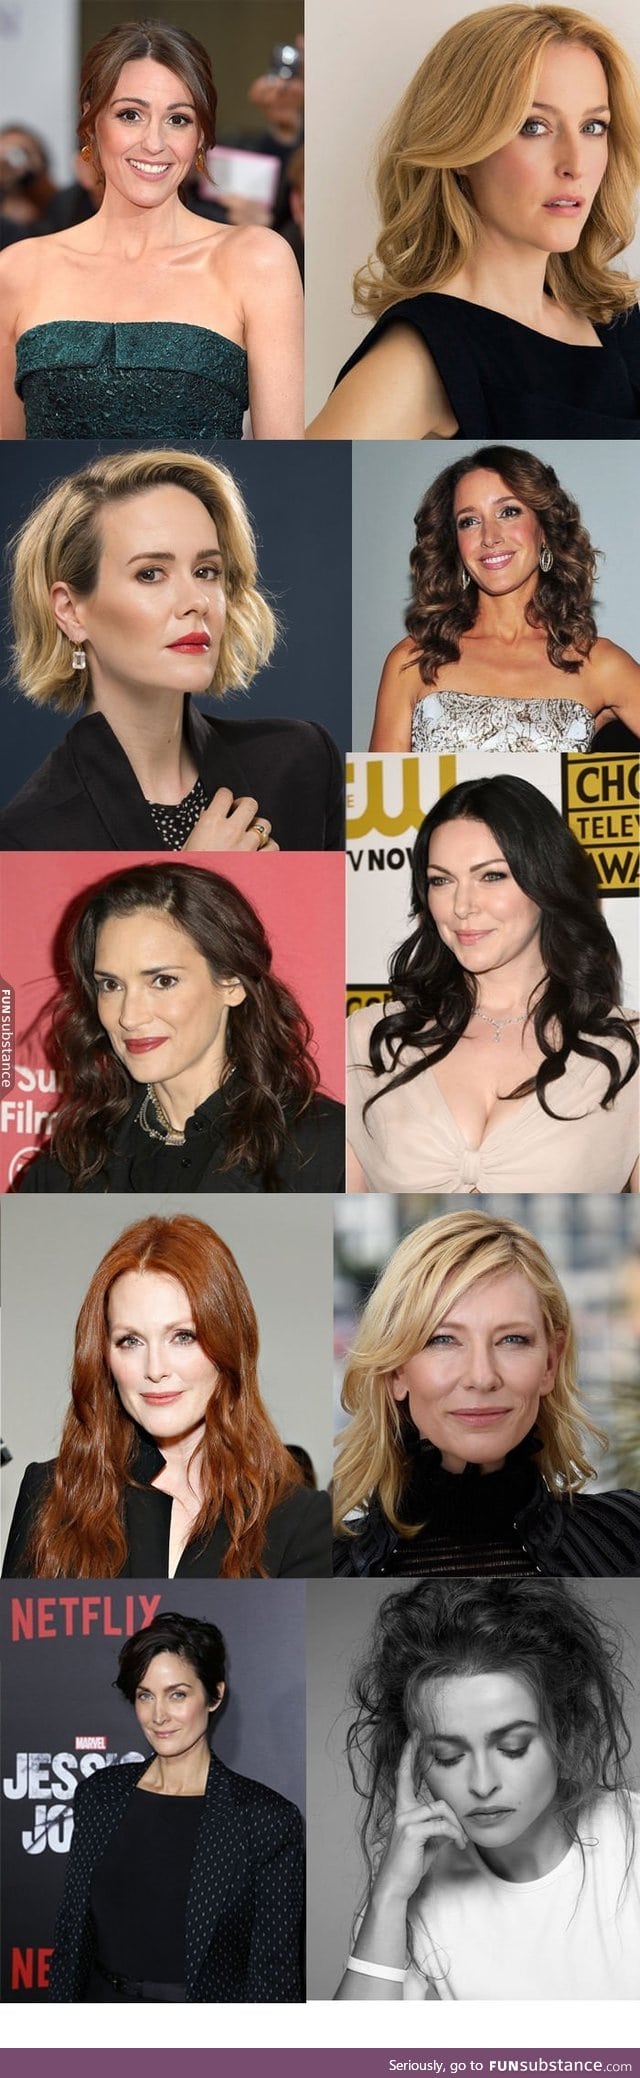 Some love for the older actresses? Everyone here seems prefer teenagers